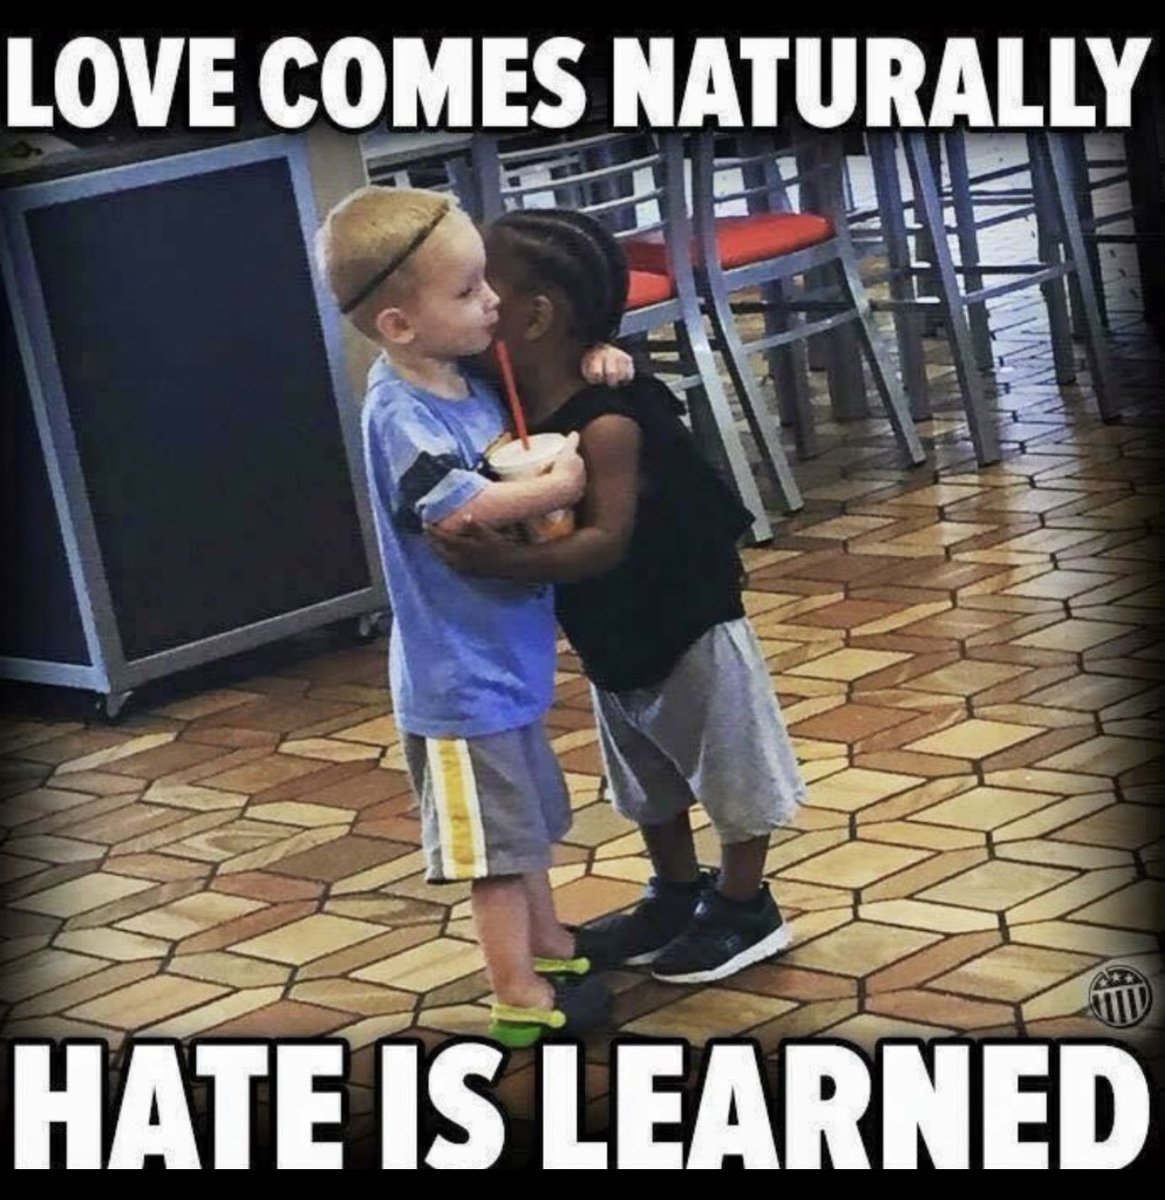 Good morning Twitter friends. Saw this and thought how true it is!! We need to love one another… we could easily learn from our kiddos. Have an awesome day today! #LoveOverHate. 😊